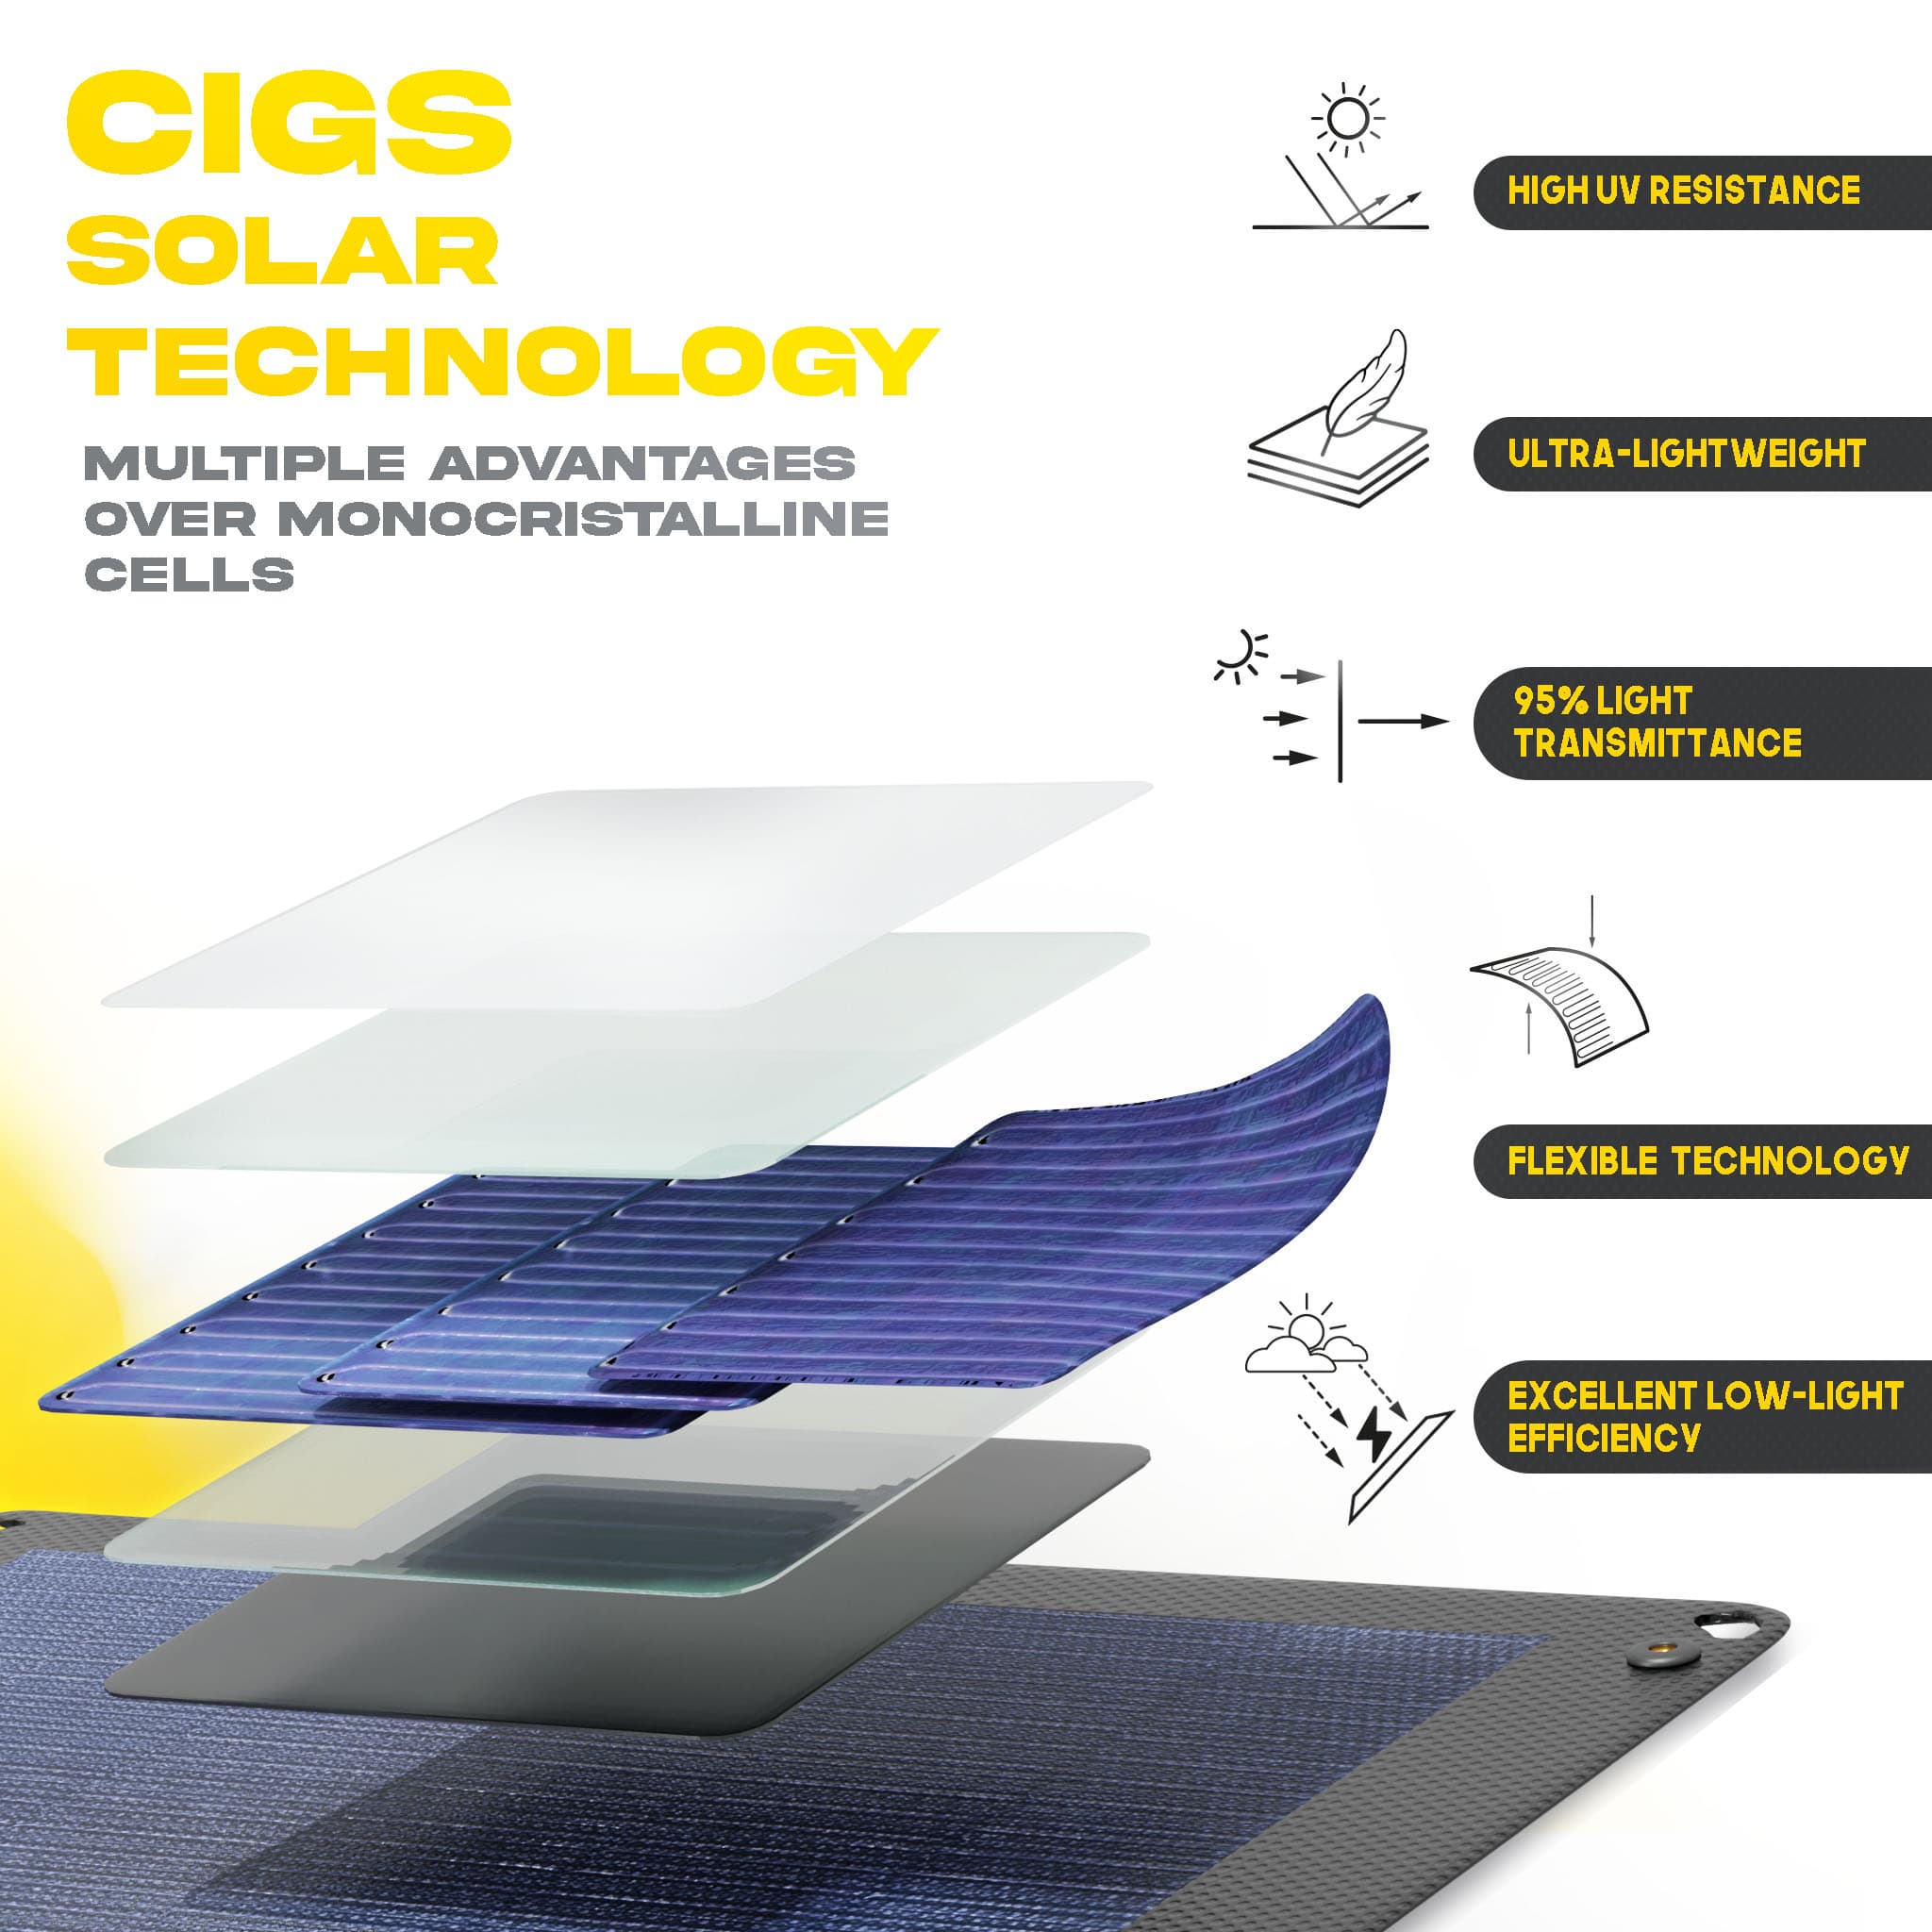 Explanation about the cigs solar technology 